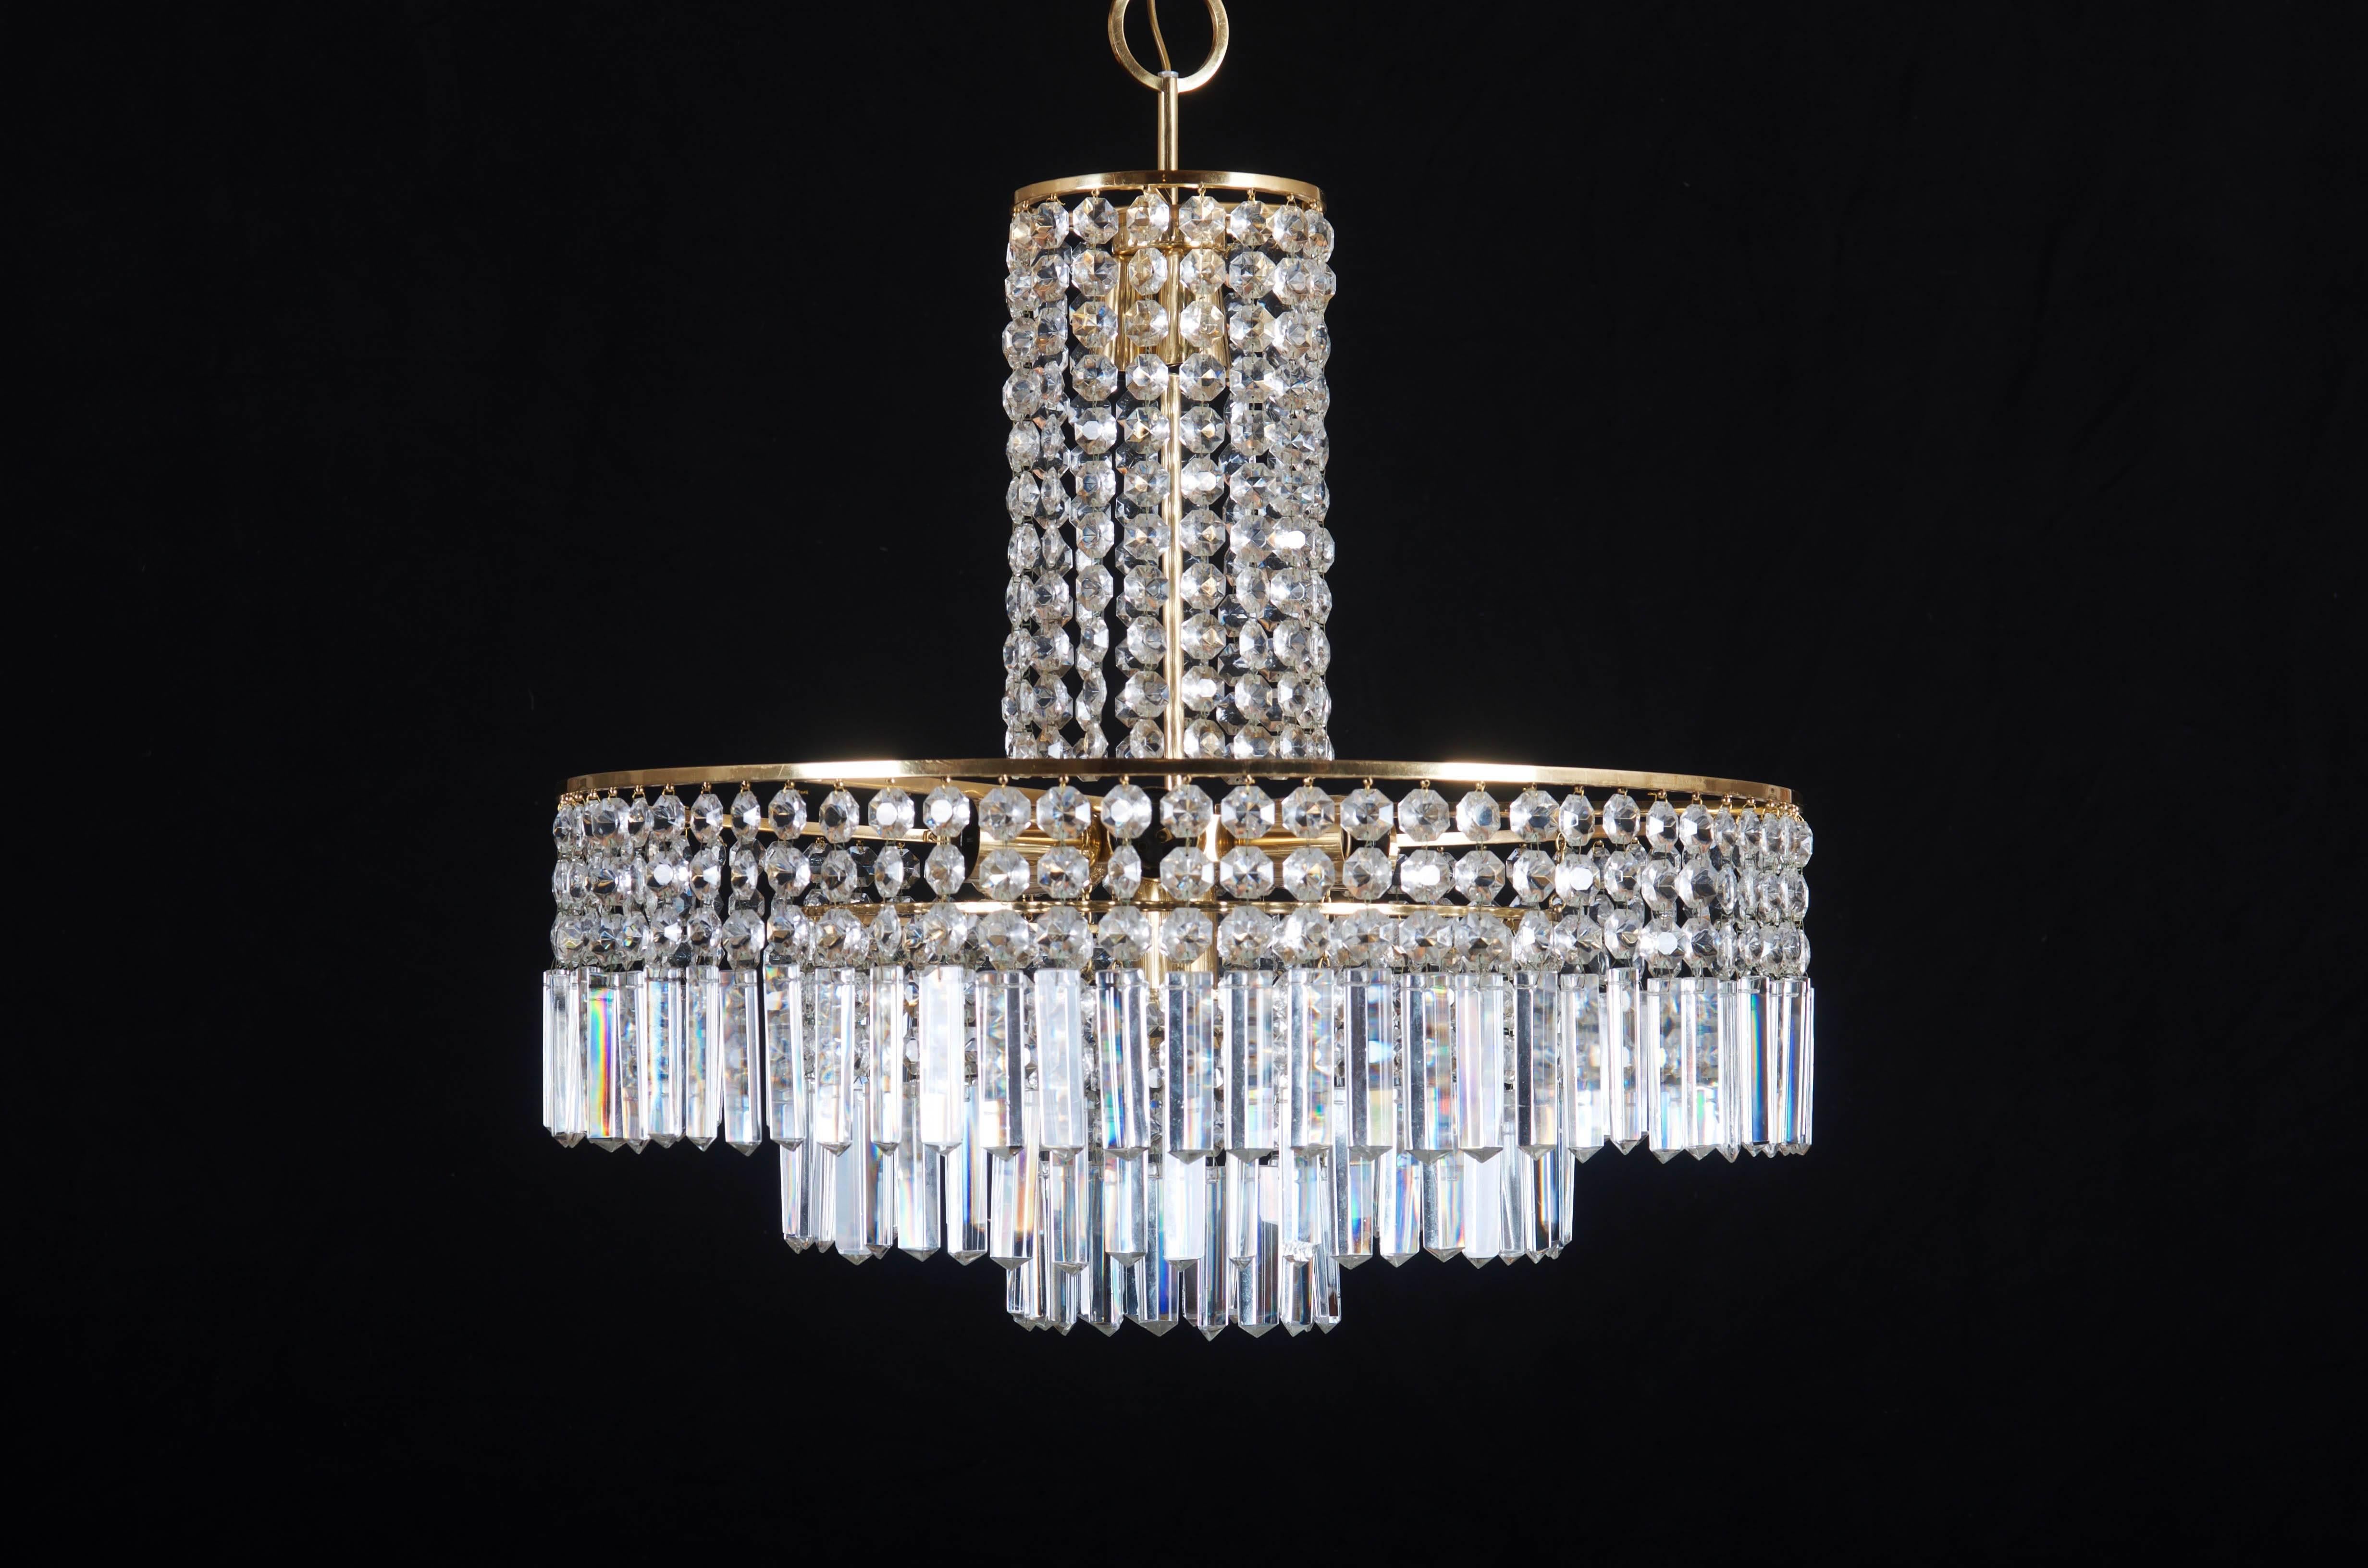 Three layers brass construction with cut crystal elements fitted with seven E27 and three E14 sockets up to 60 watts each.
Made in Vienna in the 1960s by Bakalowits & Sohne.
The dimension of the chandelier only is,
diameter 56 cm (22